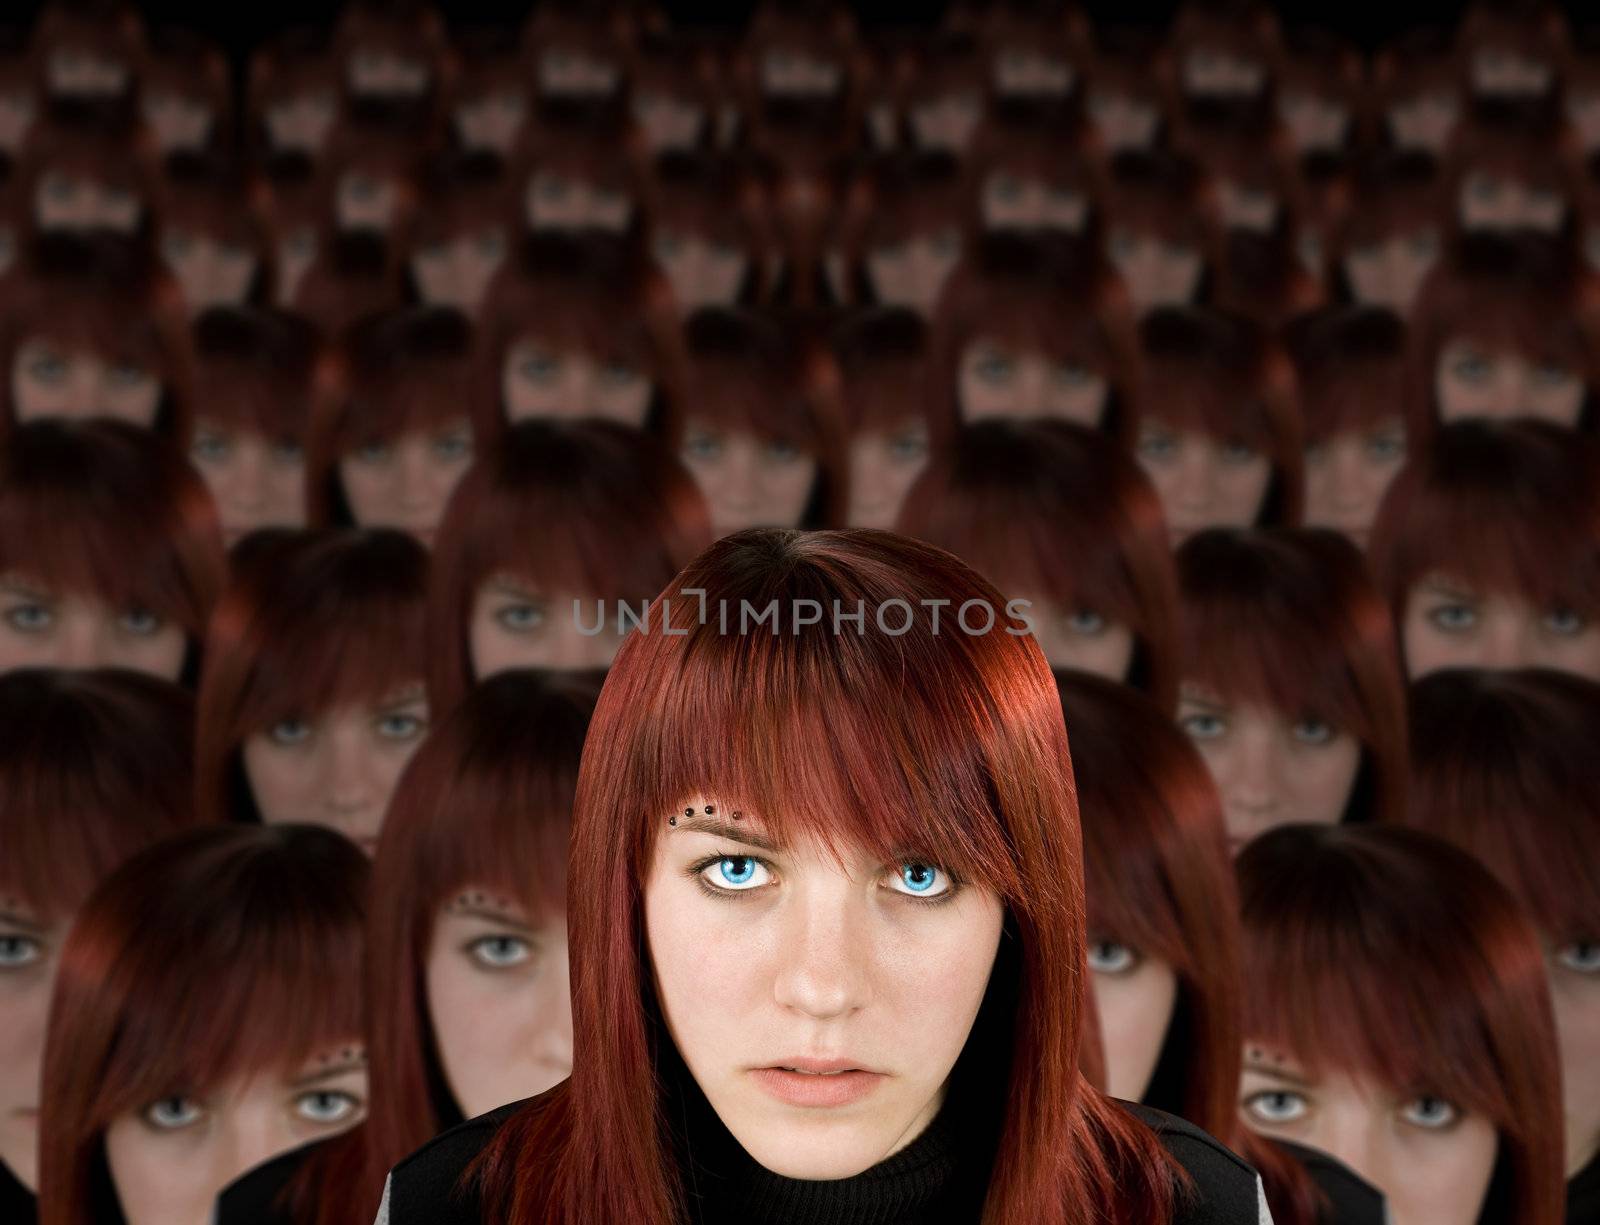 Beautiful redhead girl with piercing and hundred clones staring at camera.